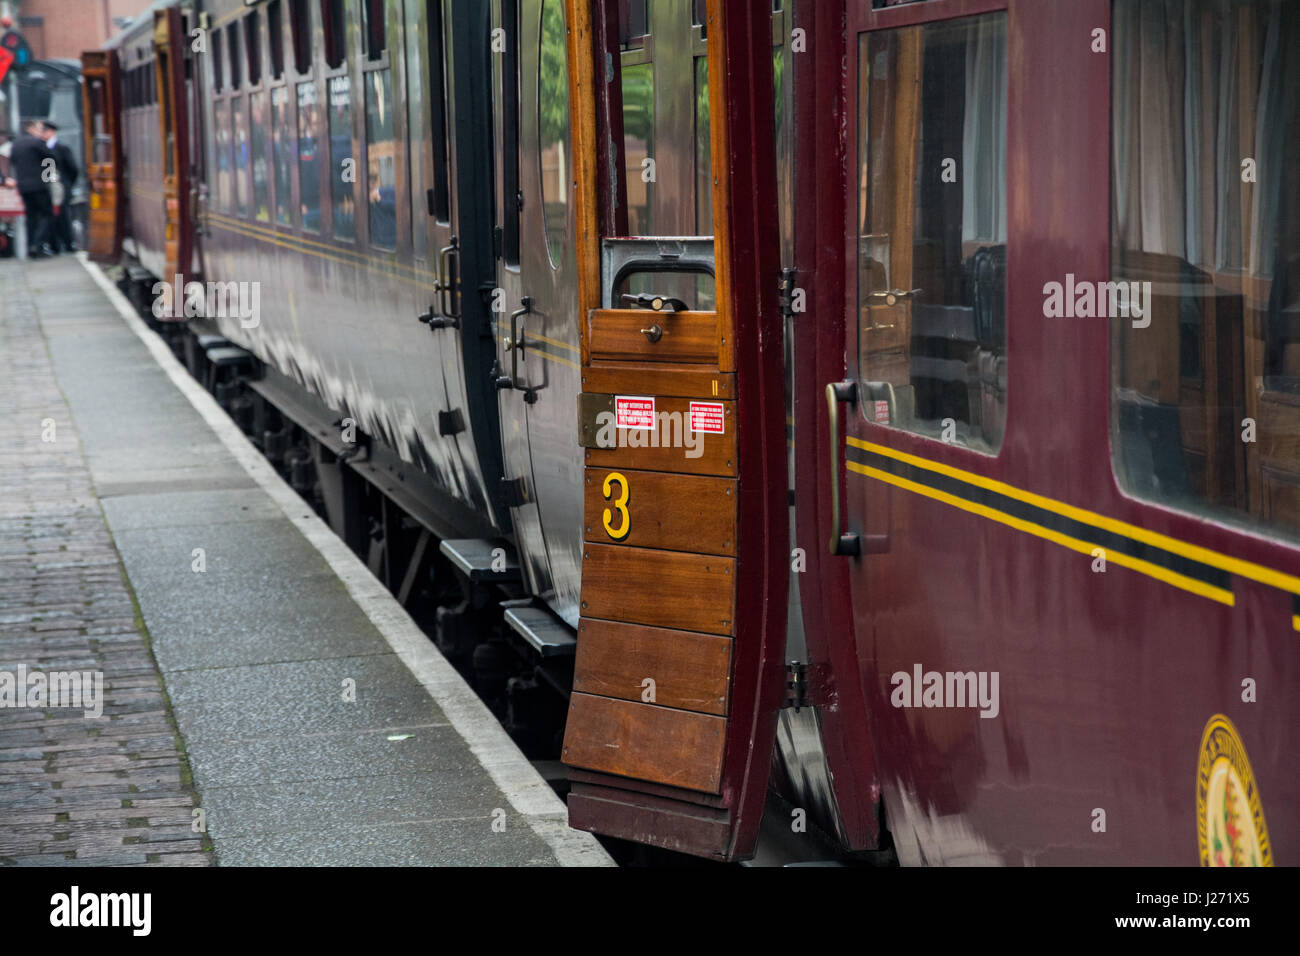 Carriages on The Royal Scot steam train, Bridgnorth Railway Station, Shropshire, West Midlands, UK. Stock Photo